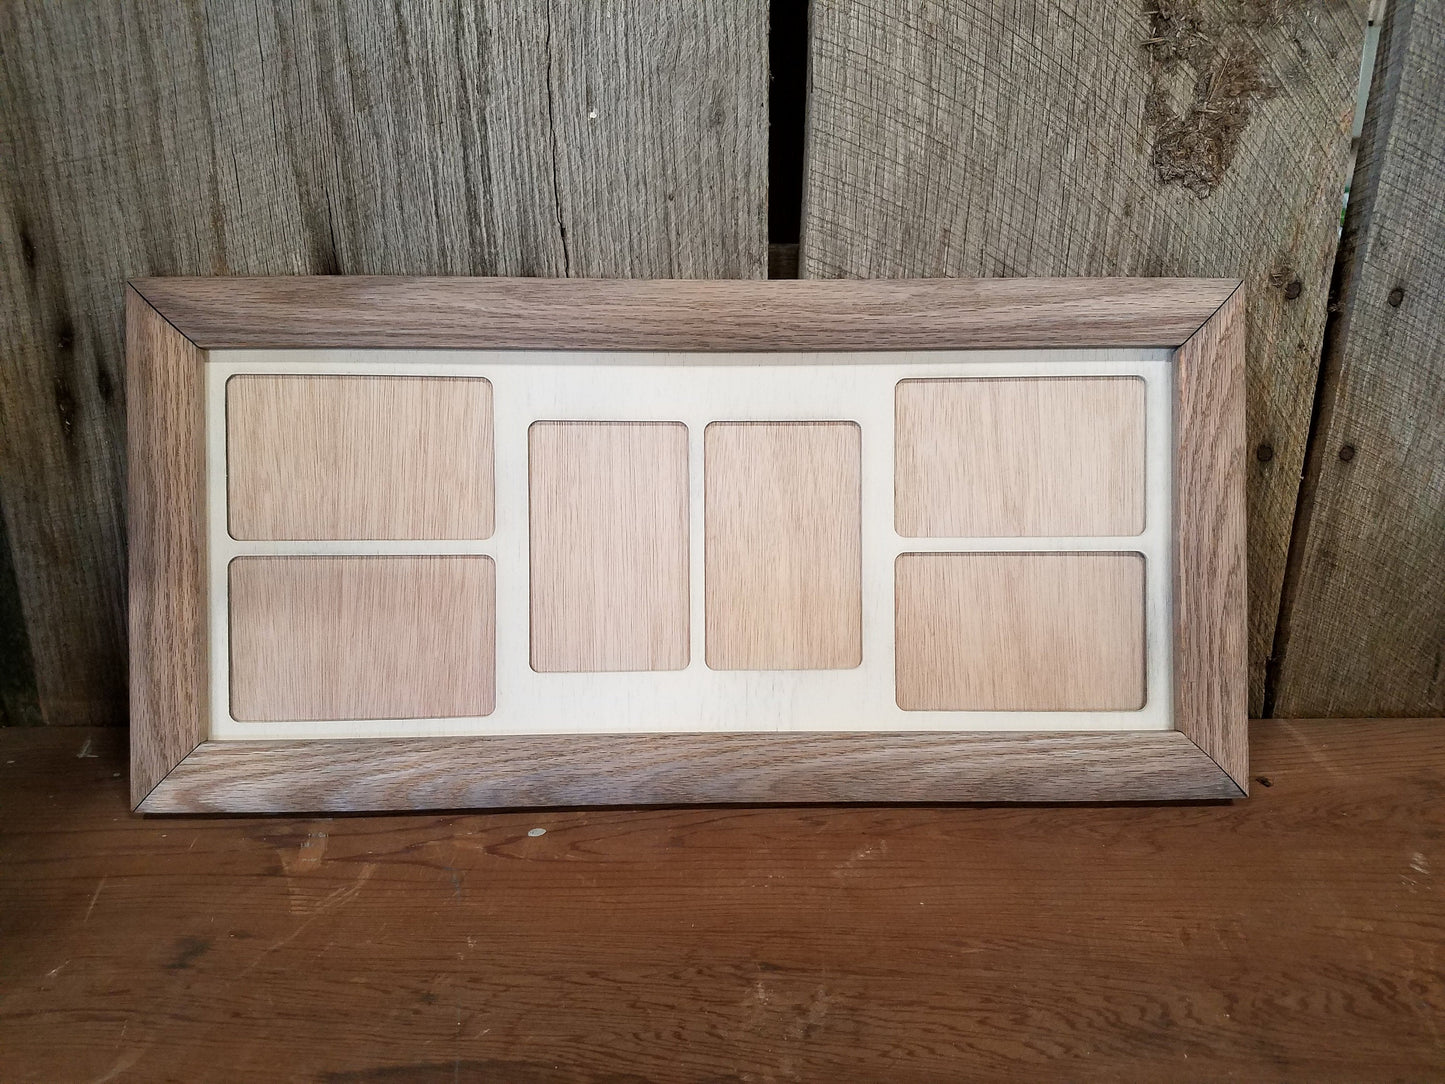 Farmhouse, 4x6, College, Picture Frame, Mat, Mat-board, Wood, Holds 6, Weathered Oak, Handmade, Country, Rustic, Primitive, Multiple